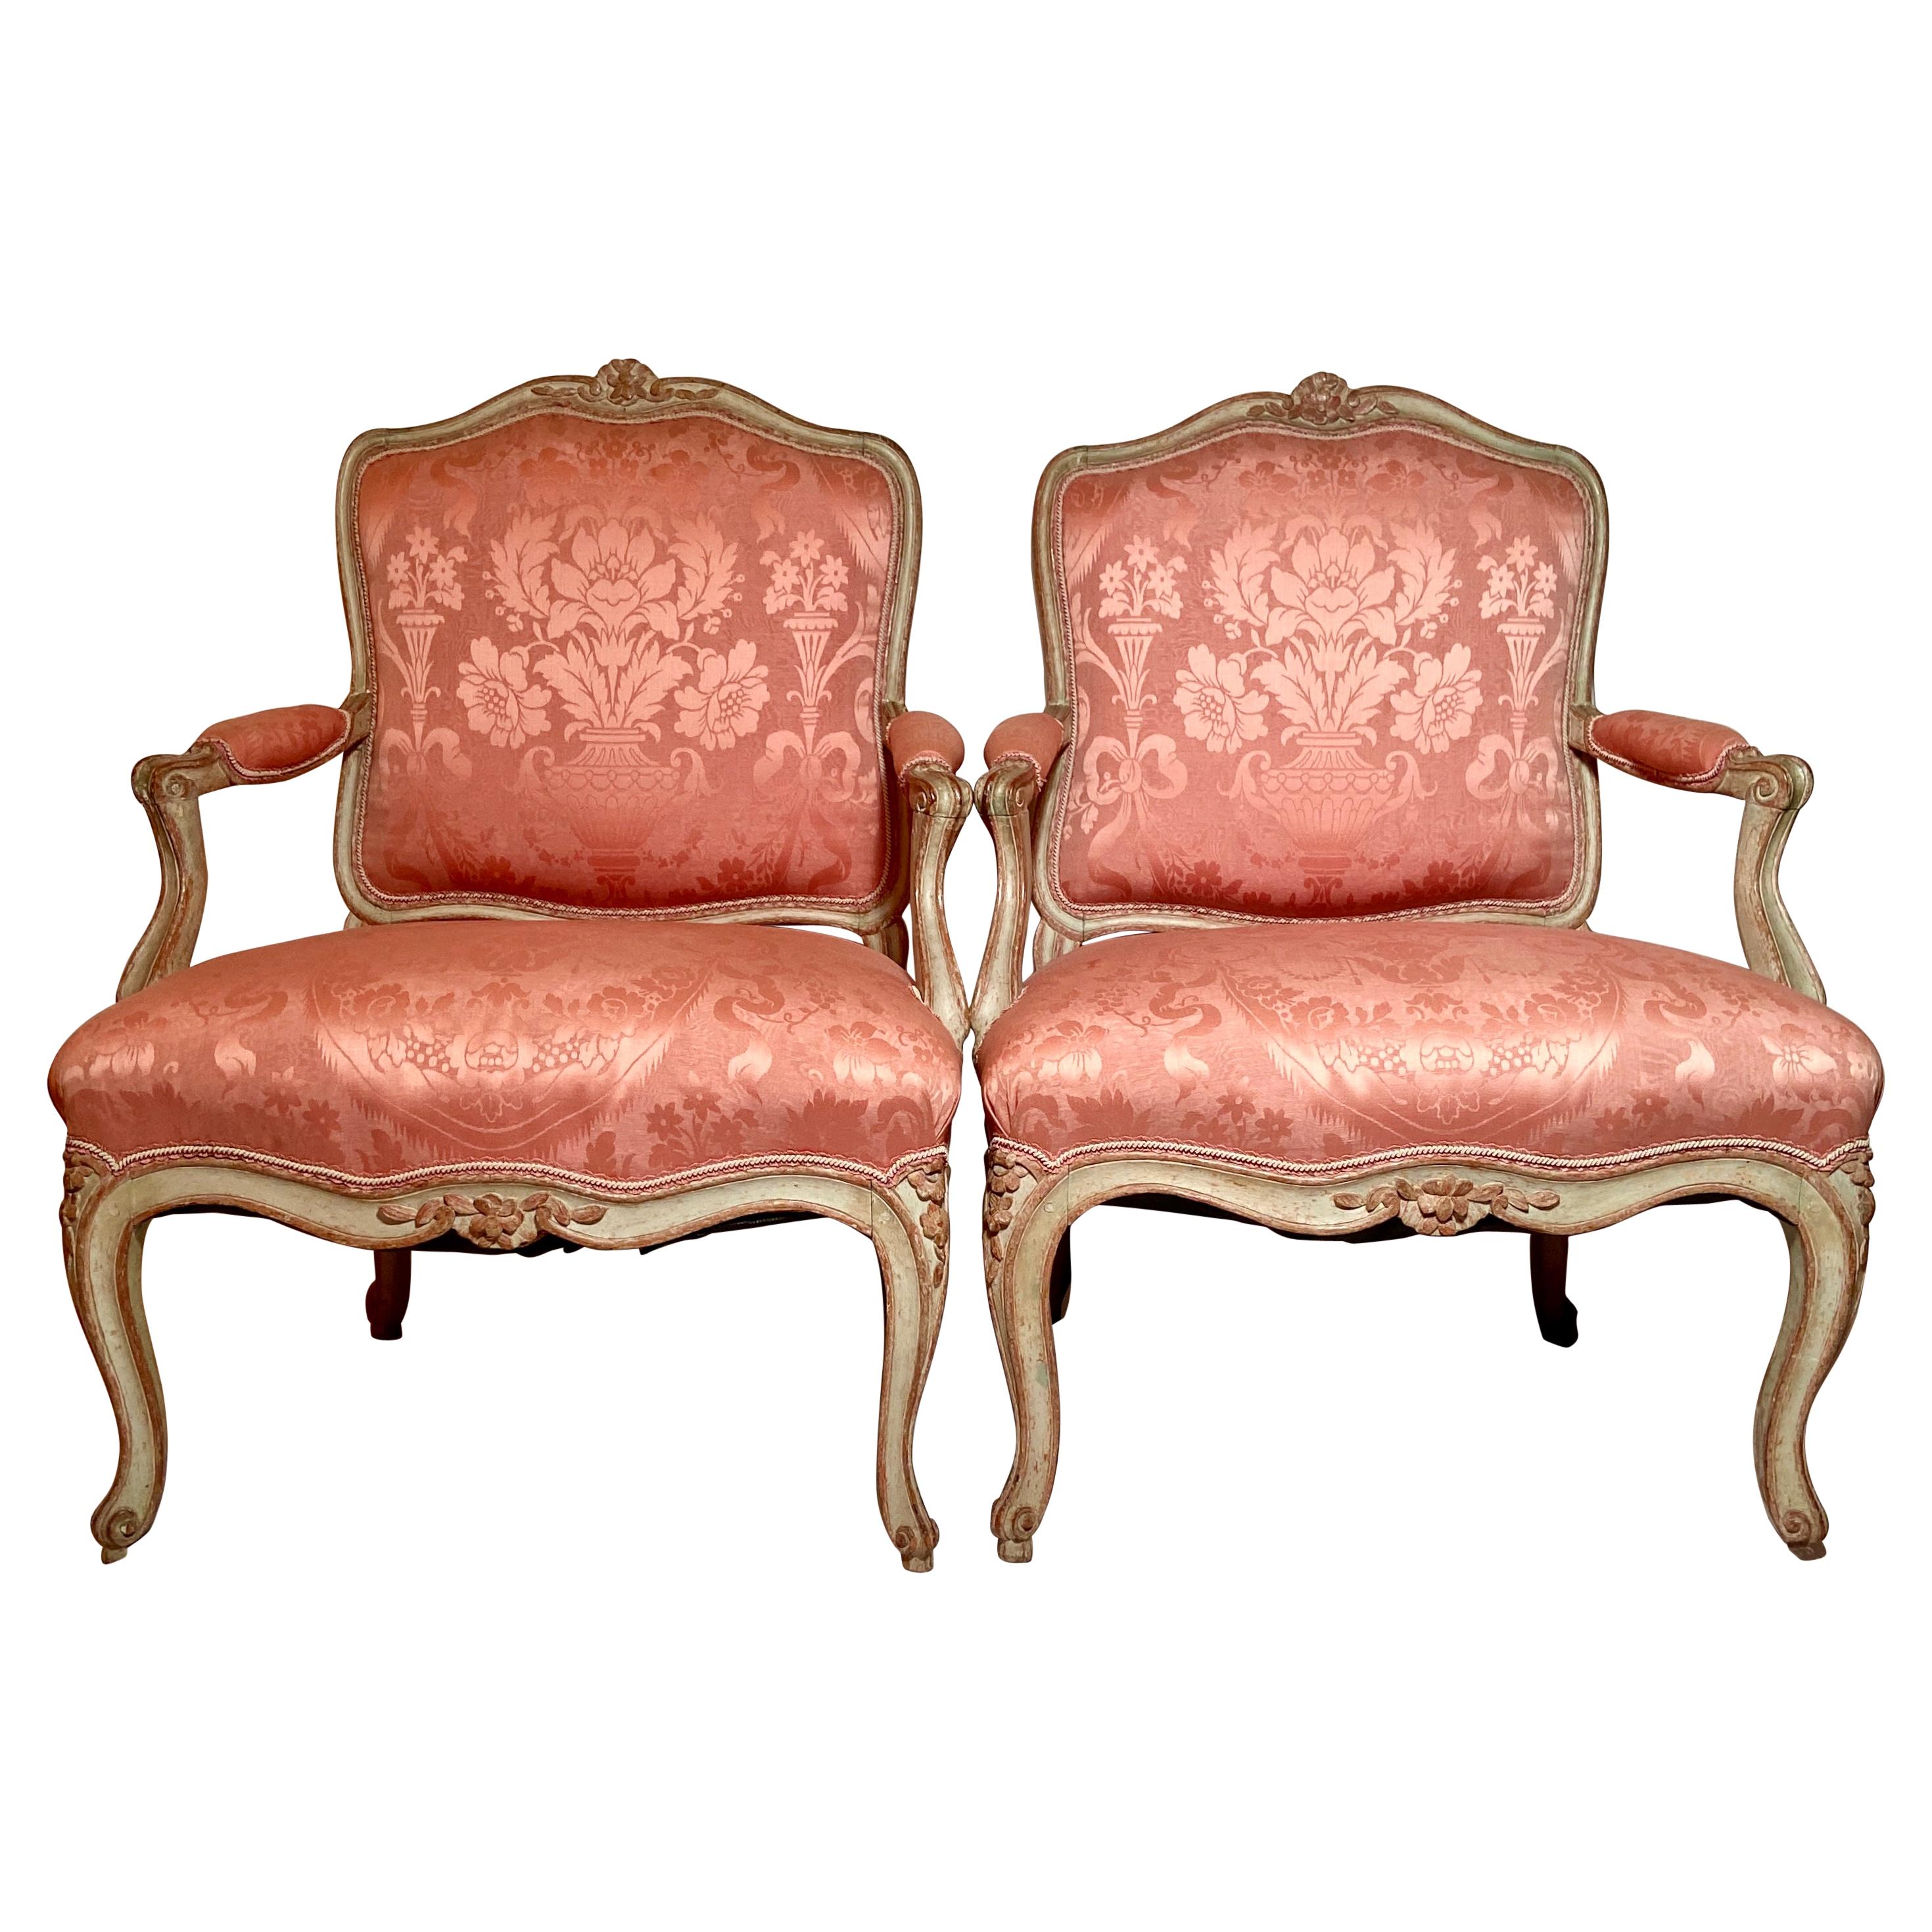 Pair Antique French Louis XV Pink Upholstered "Fauteuils" Armchairs, Circa 1890.